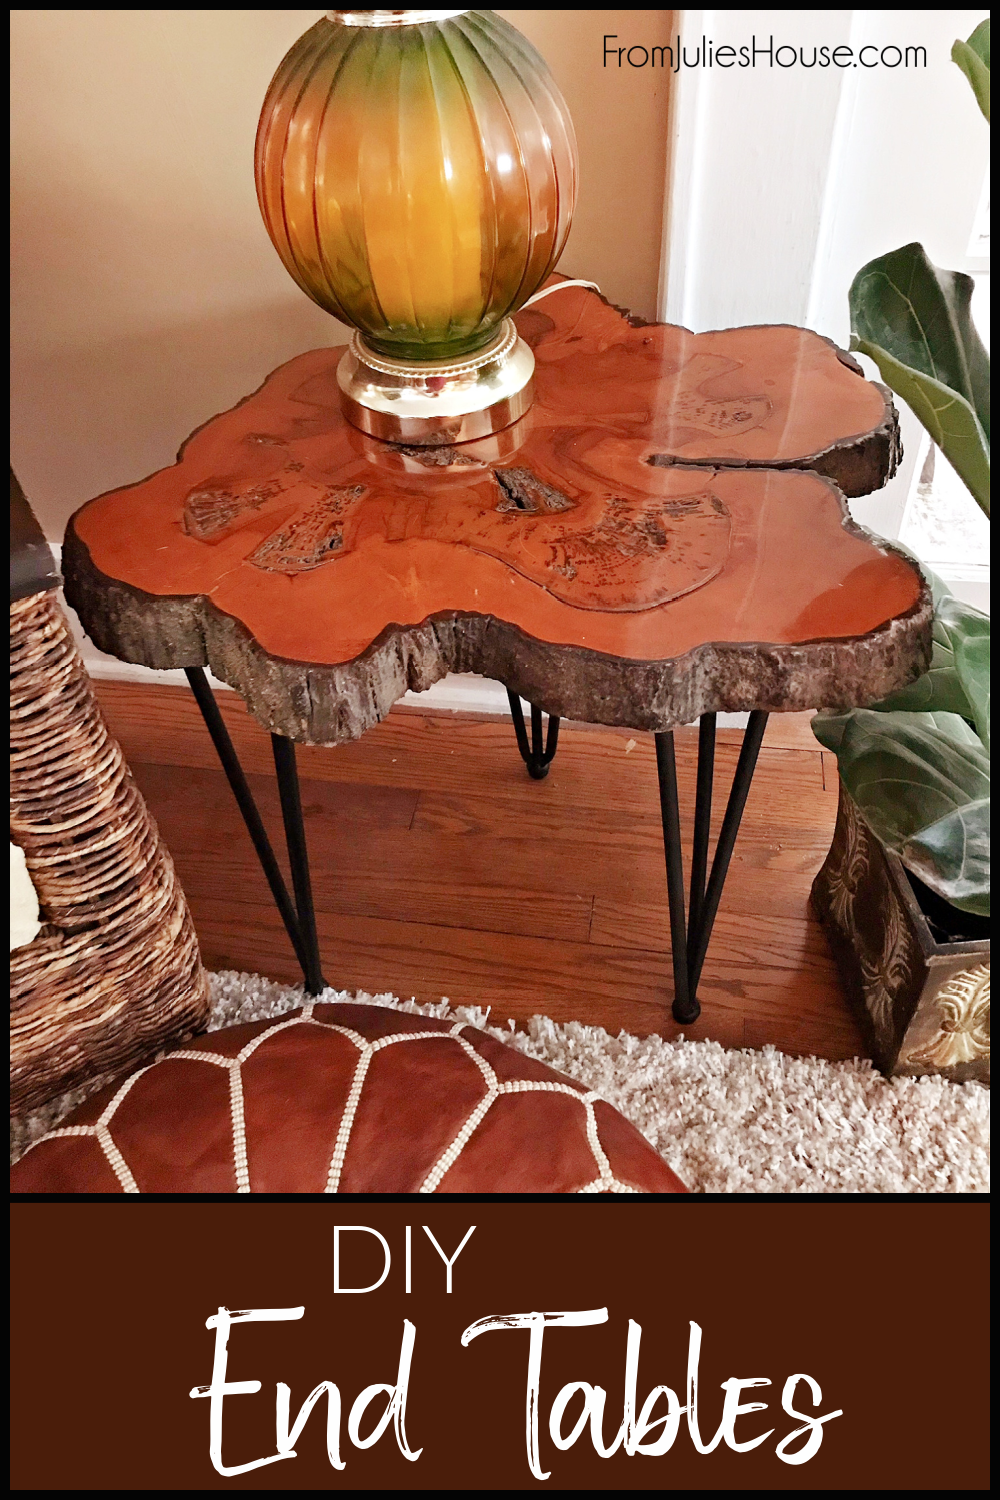 Okay, this BARELY qualifies as a DIY project, but I recently found 2 big pieces of lacquered live edge burl wood at the thrift store and turned them into end tables. Sometimes you have to take the easy win!